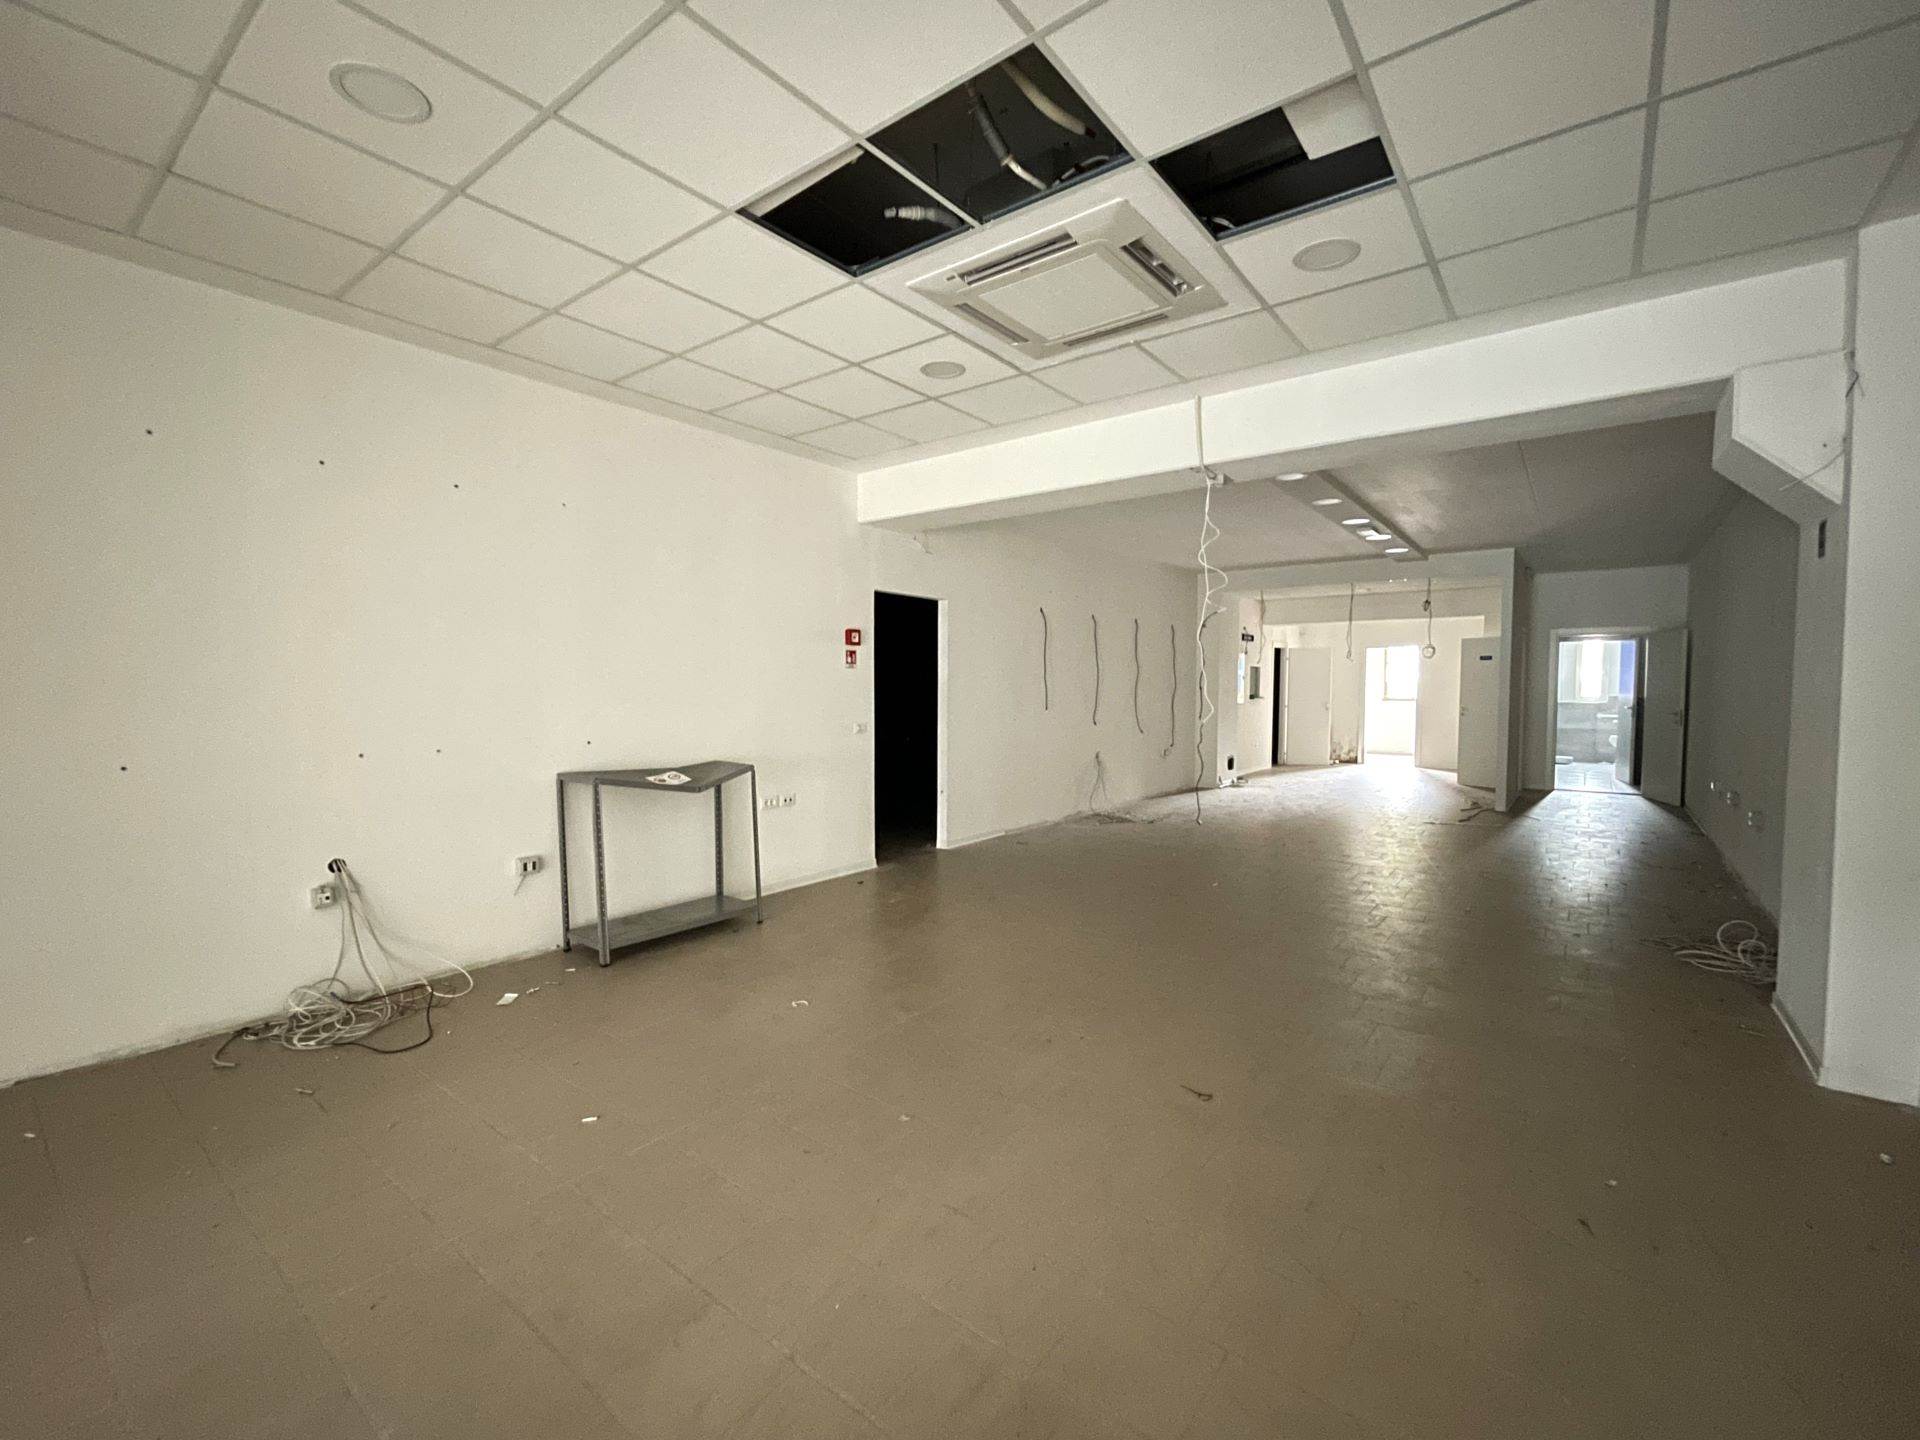 238 m2 shop with large window and excellent visibility located in the commercial area of Viale Toselli, where it is clearly visible from passing cars 